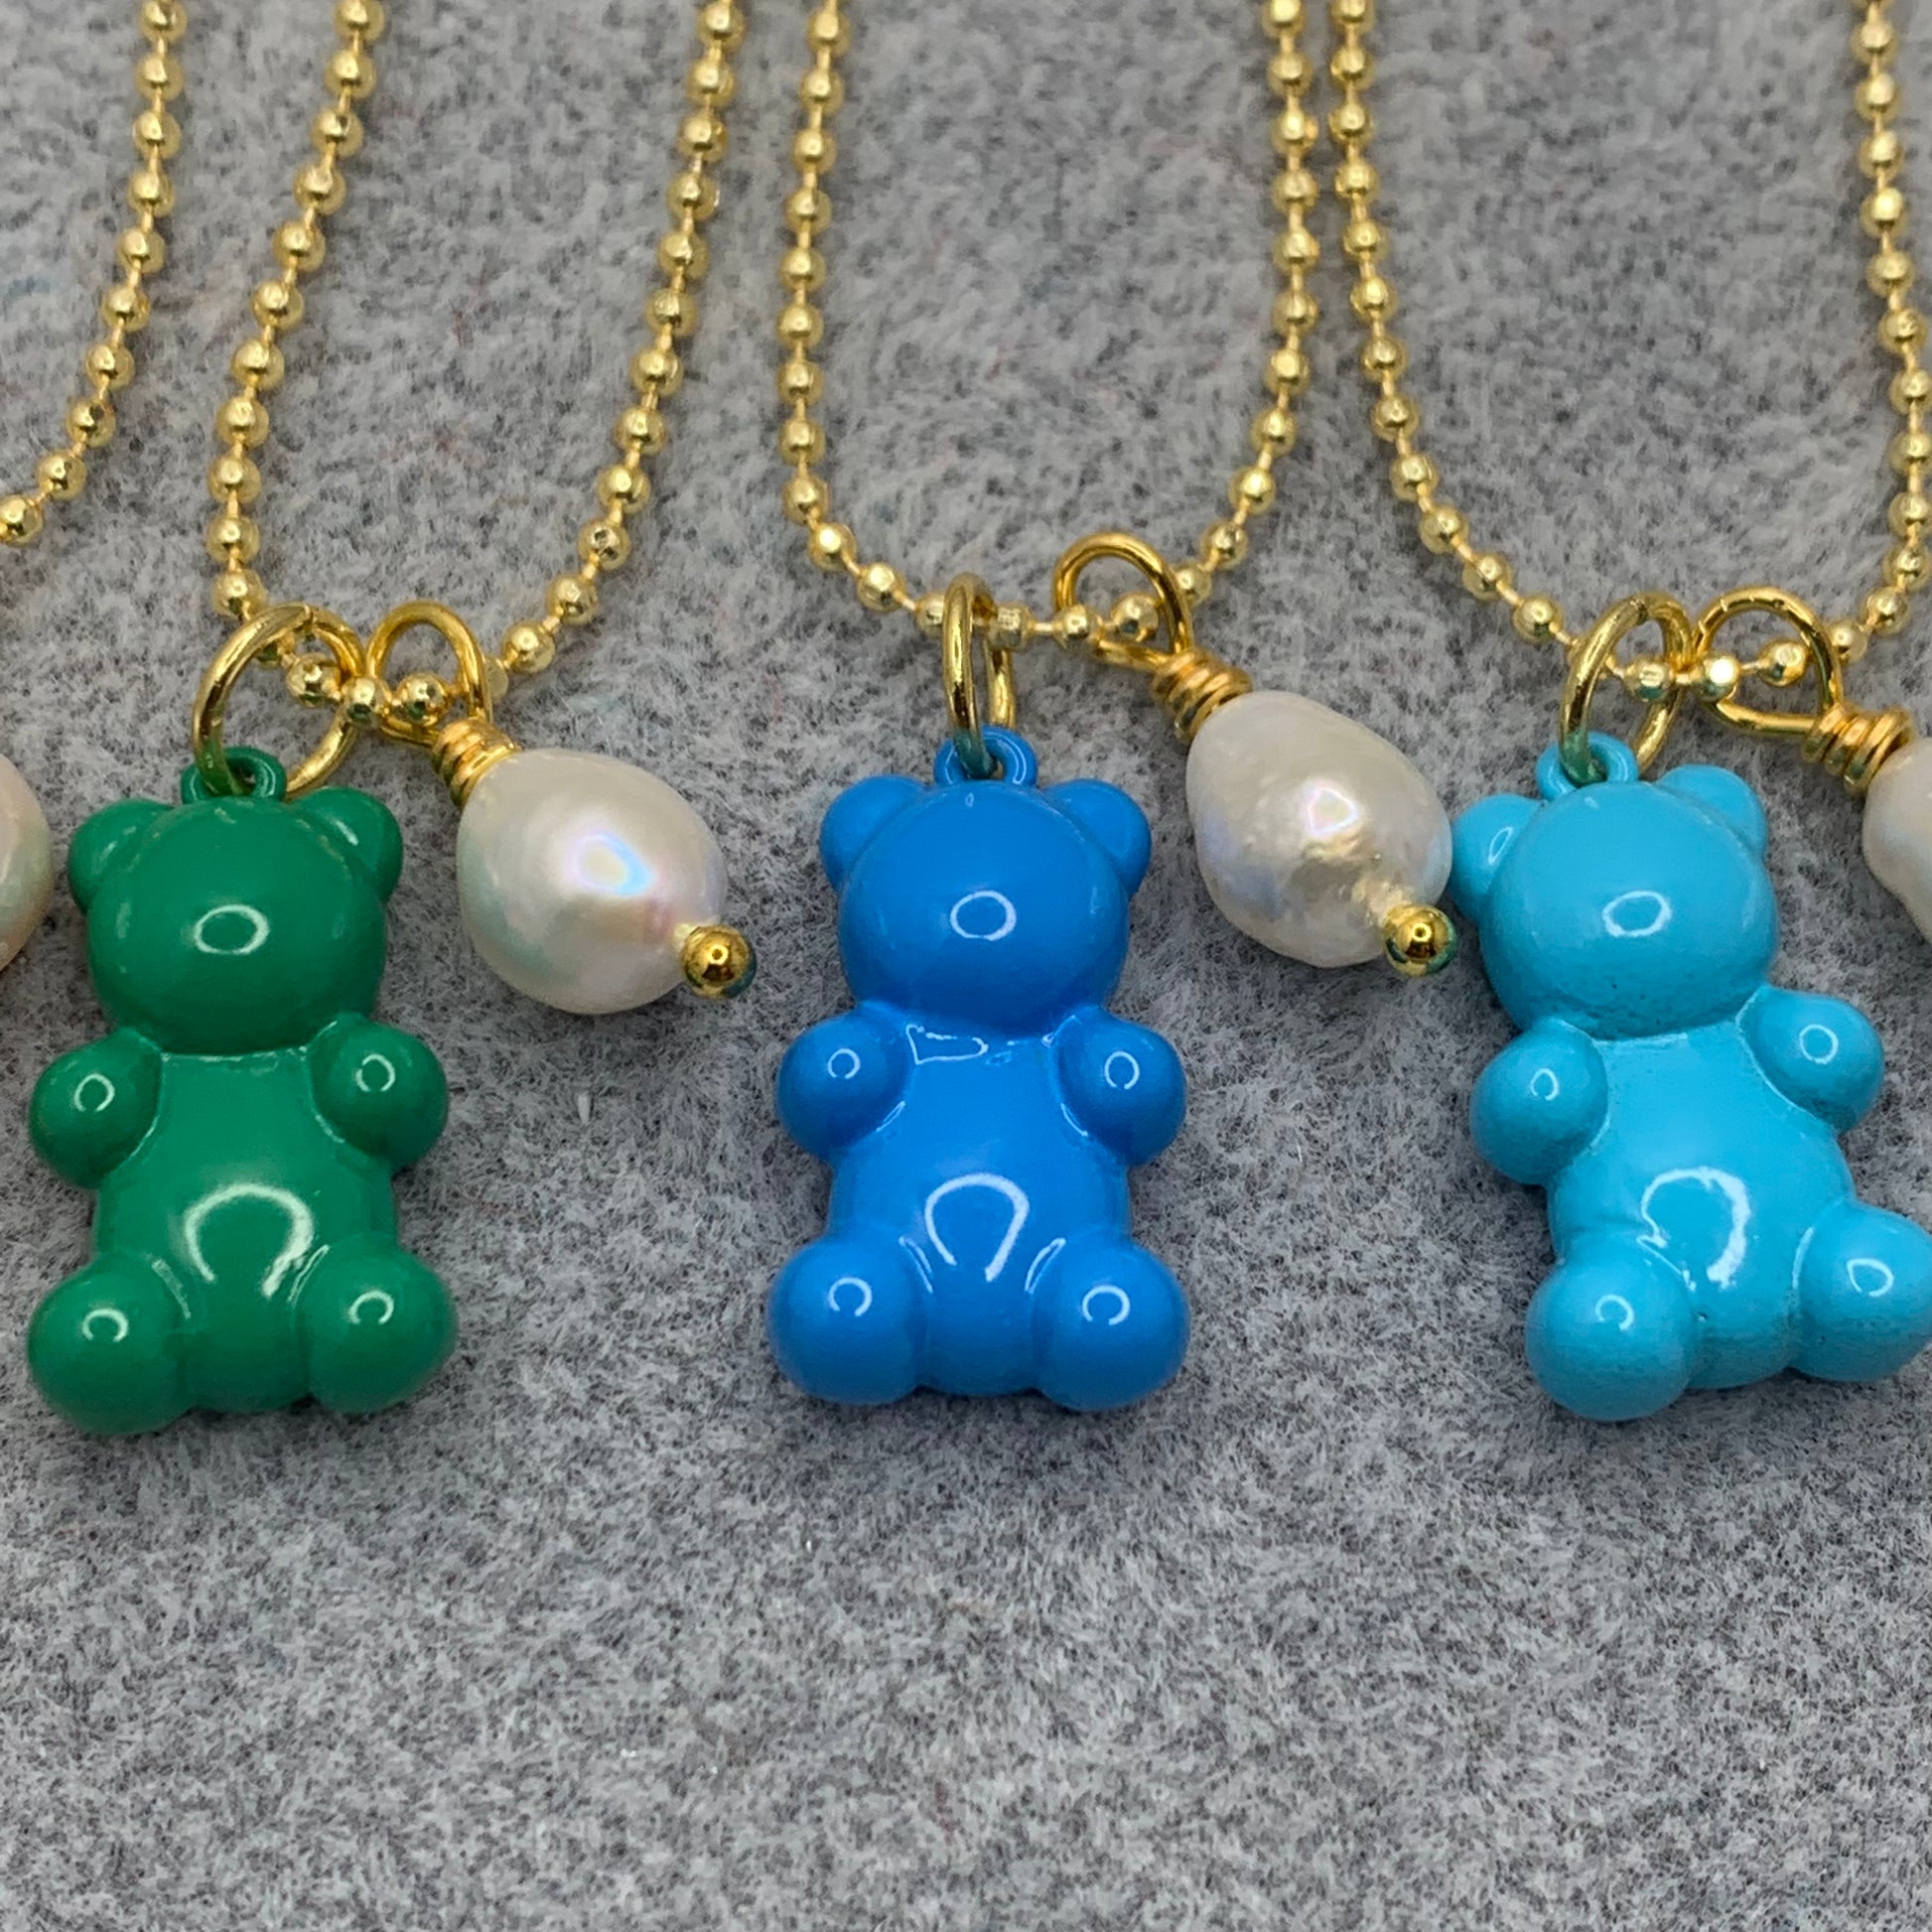 Ball and chain necklace with enameled gummy bear pendant